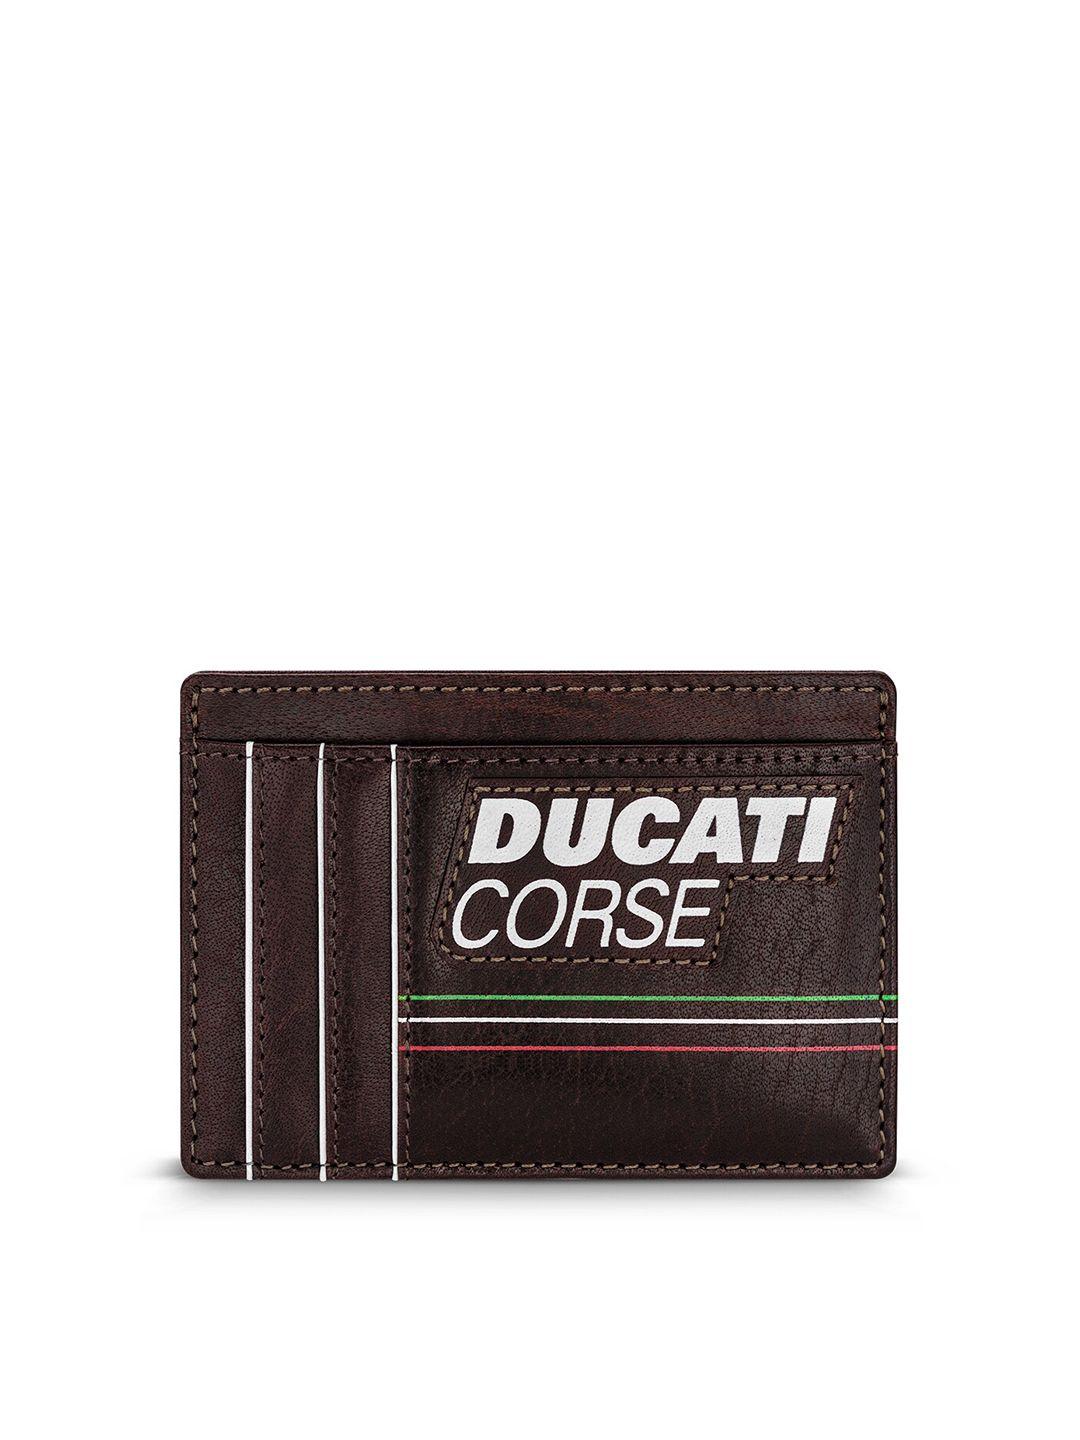 ducati corse men typography leather card holder